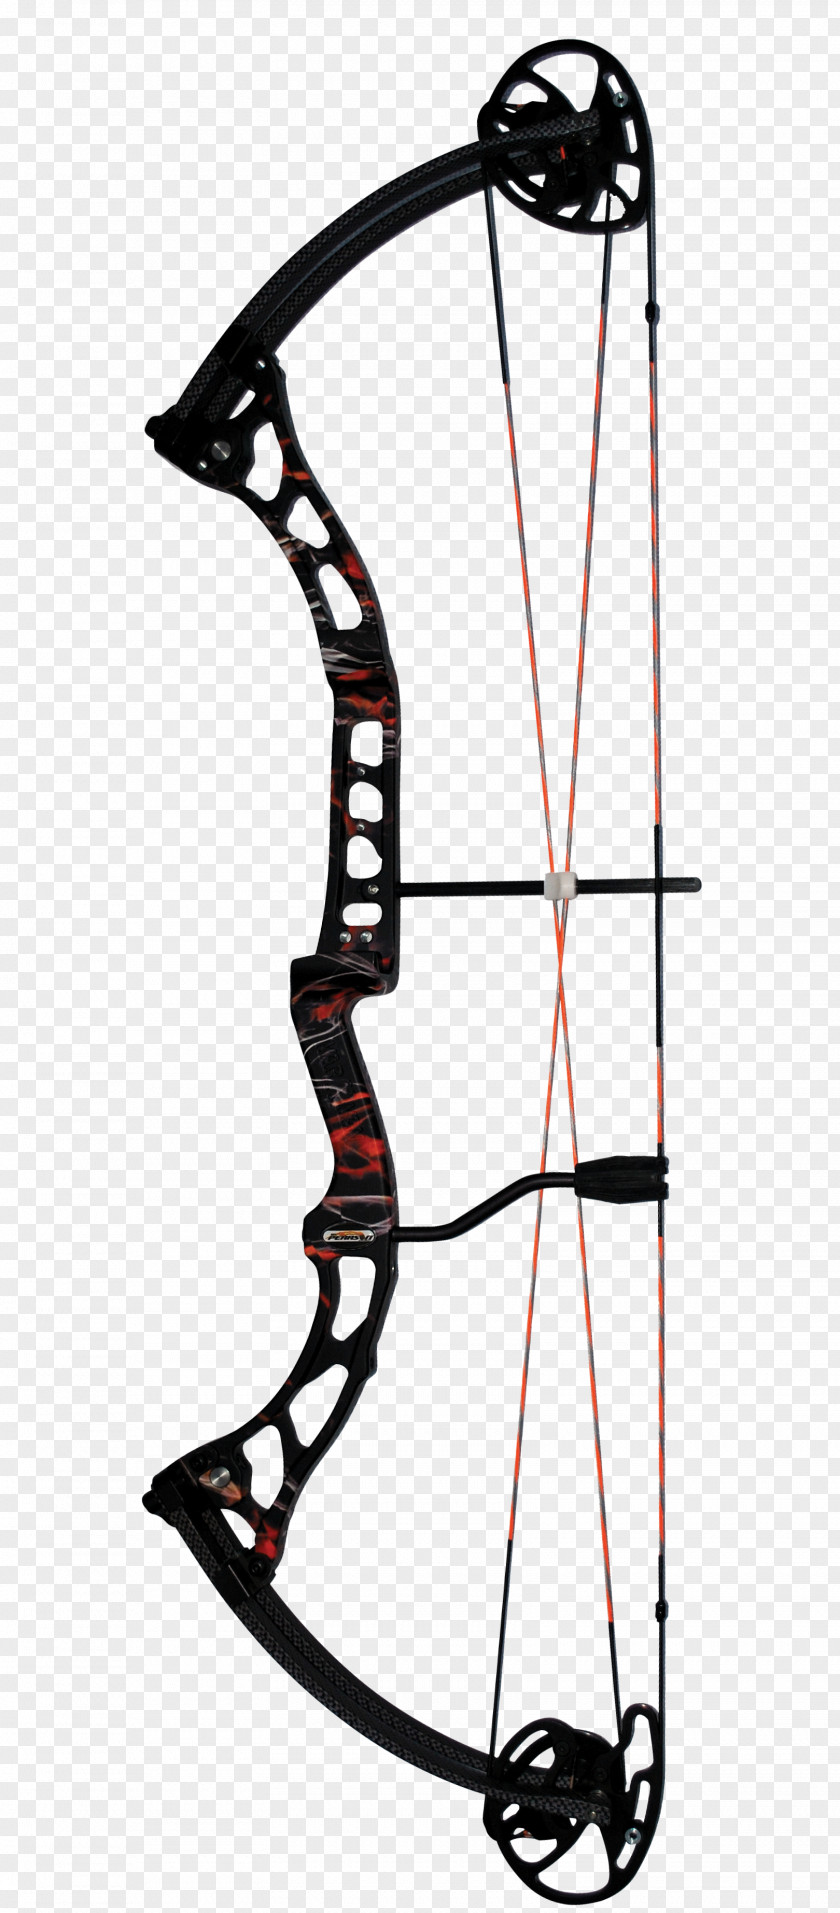 Bow Compound Bows And Arrow Archery PNG